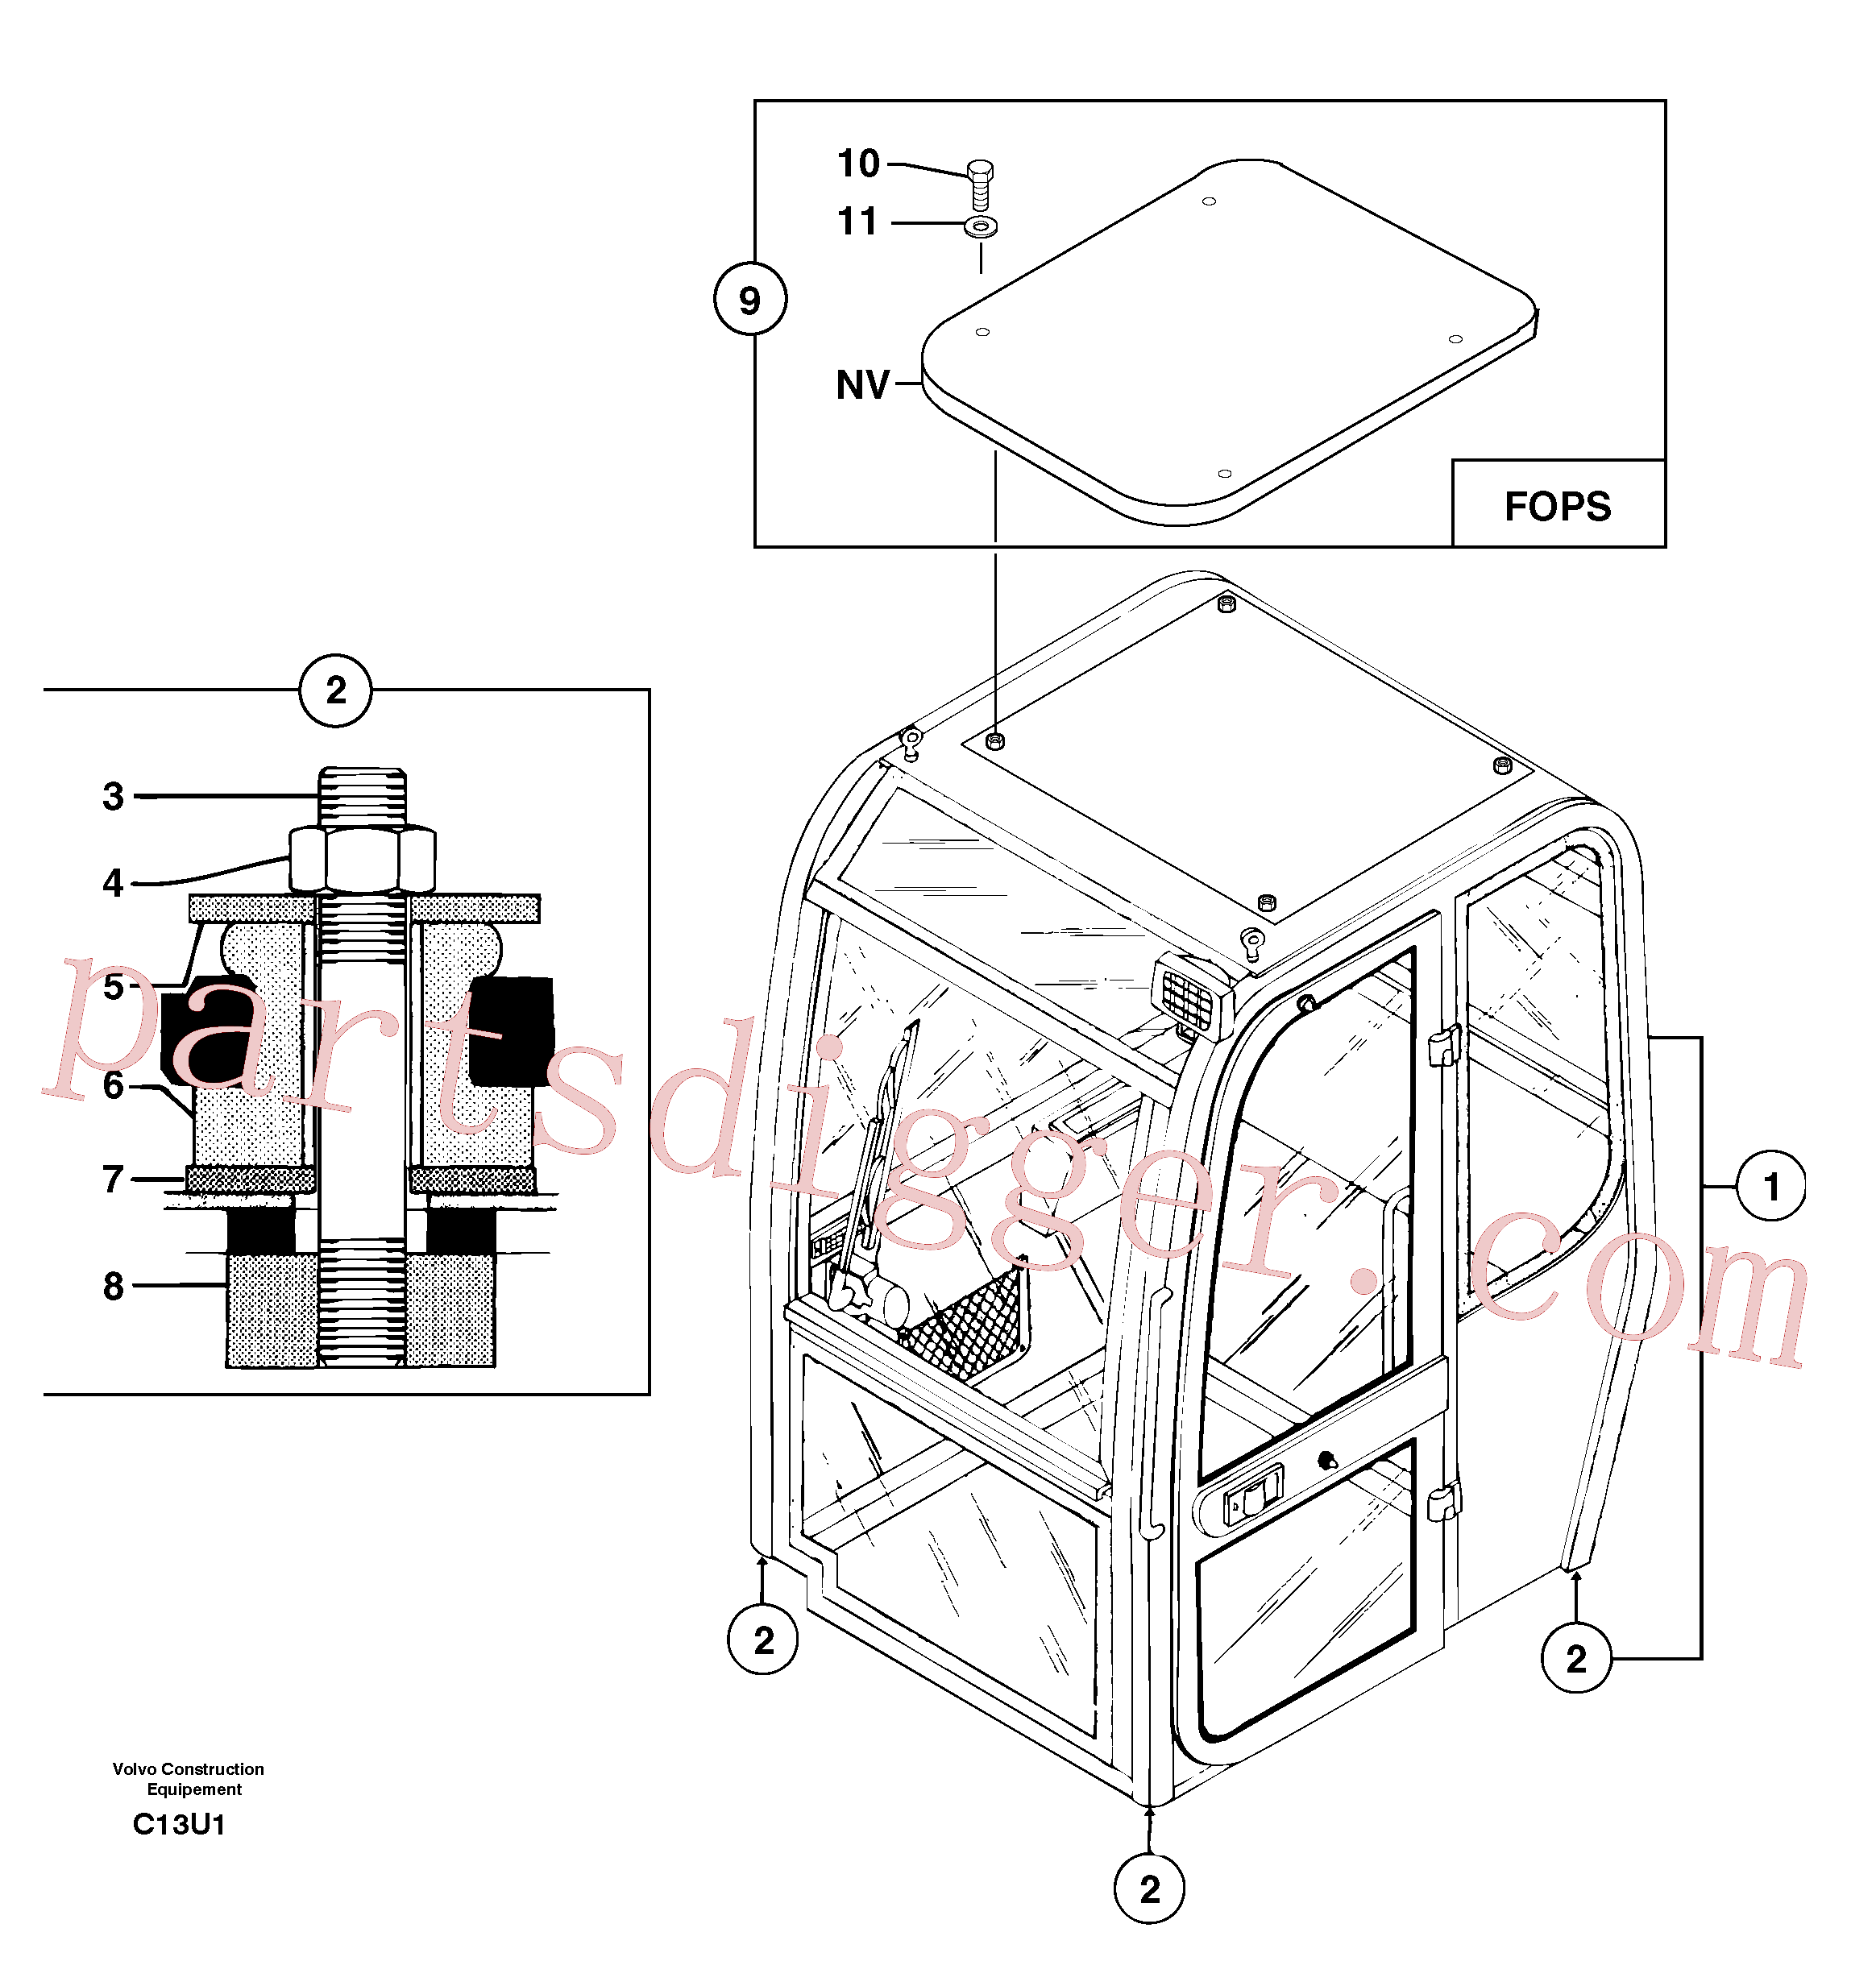 PJ4460044 for Volvo Equipped cabin(C13U1 assembly)